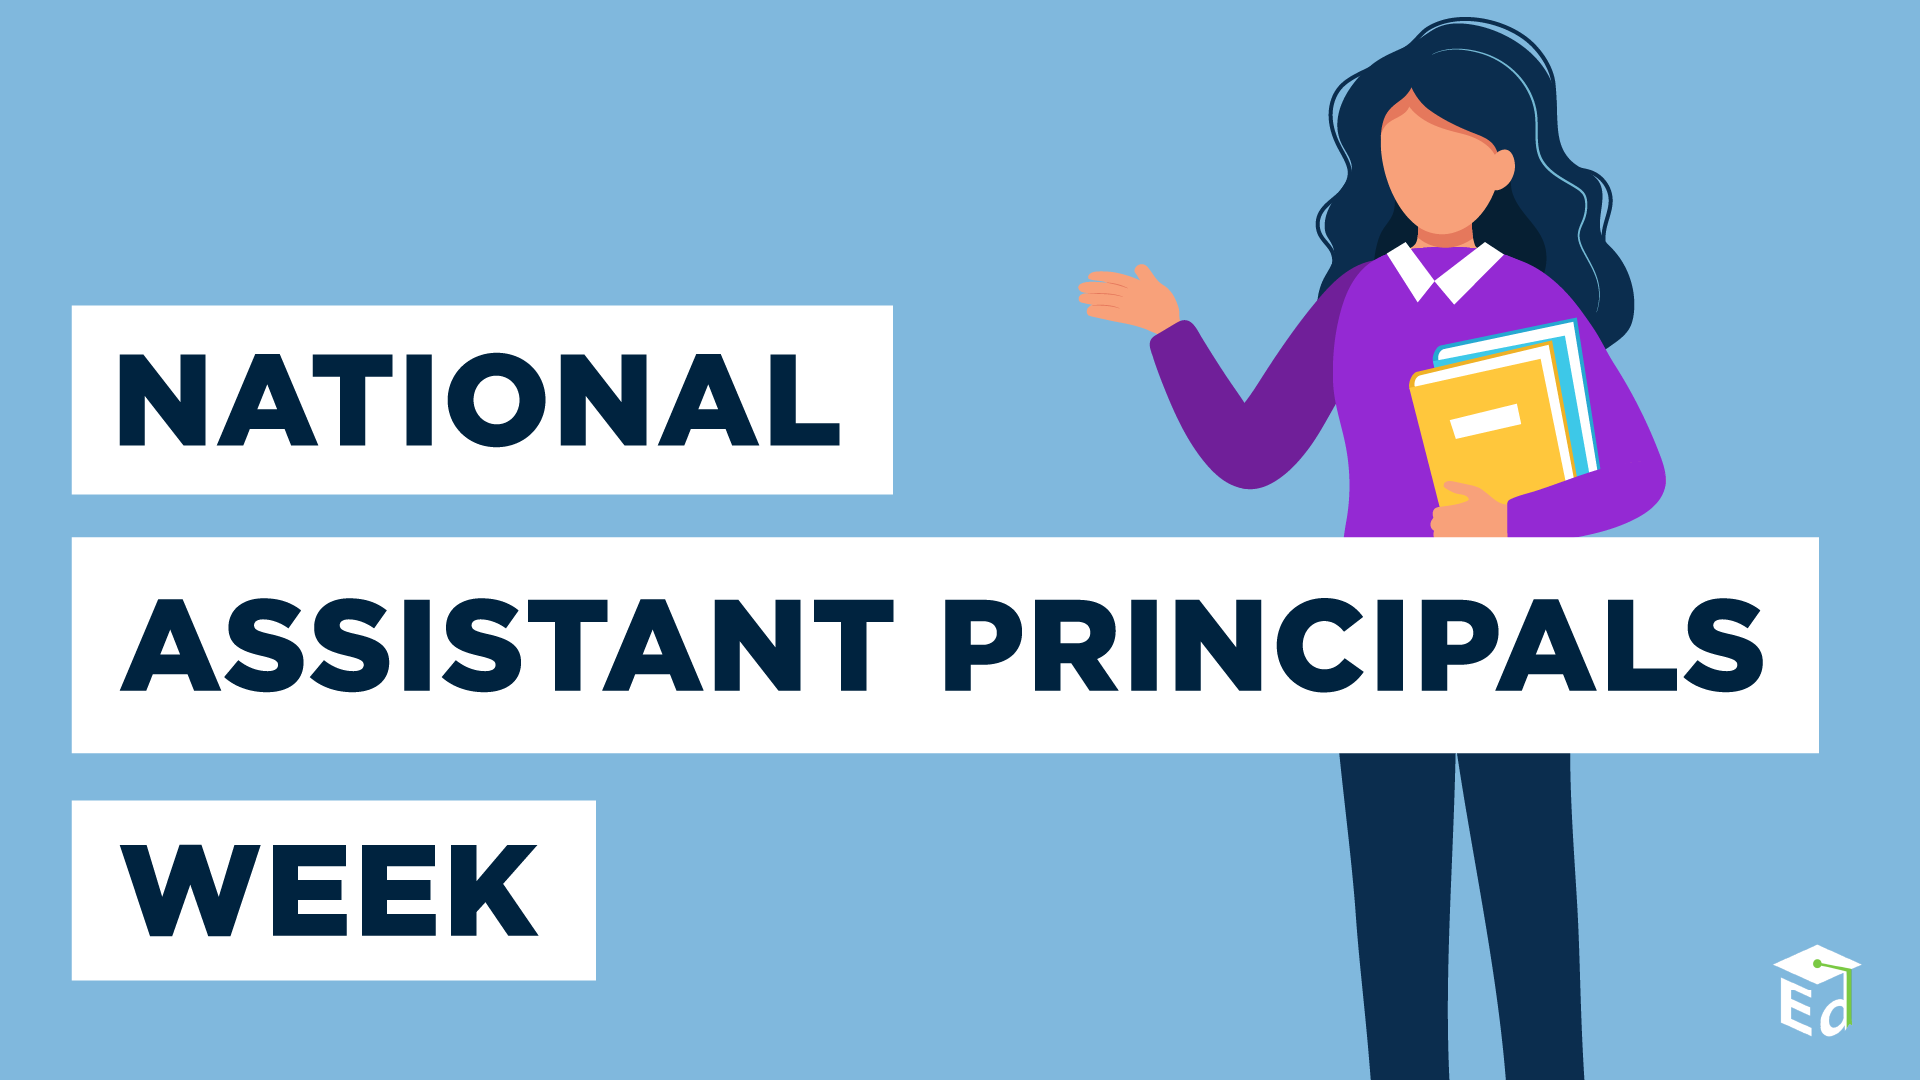 U.S. Department of Education on Twitter "Assistant principals We